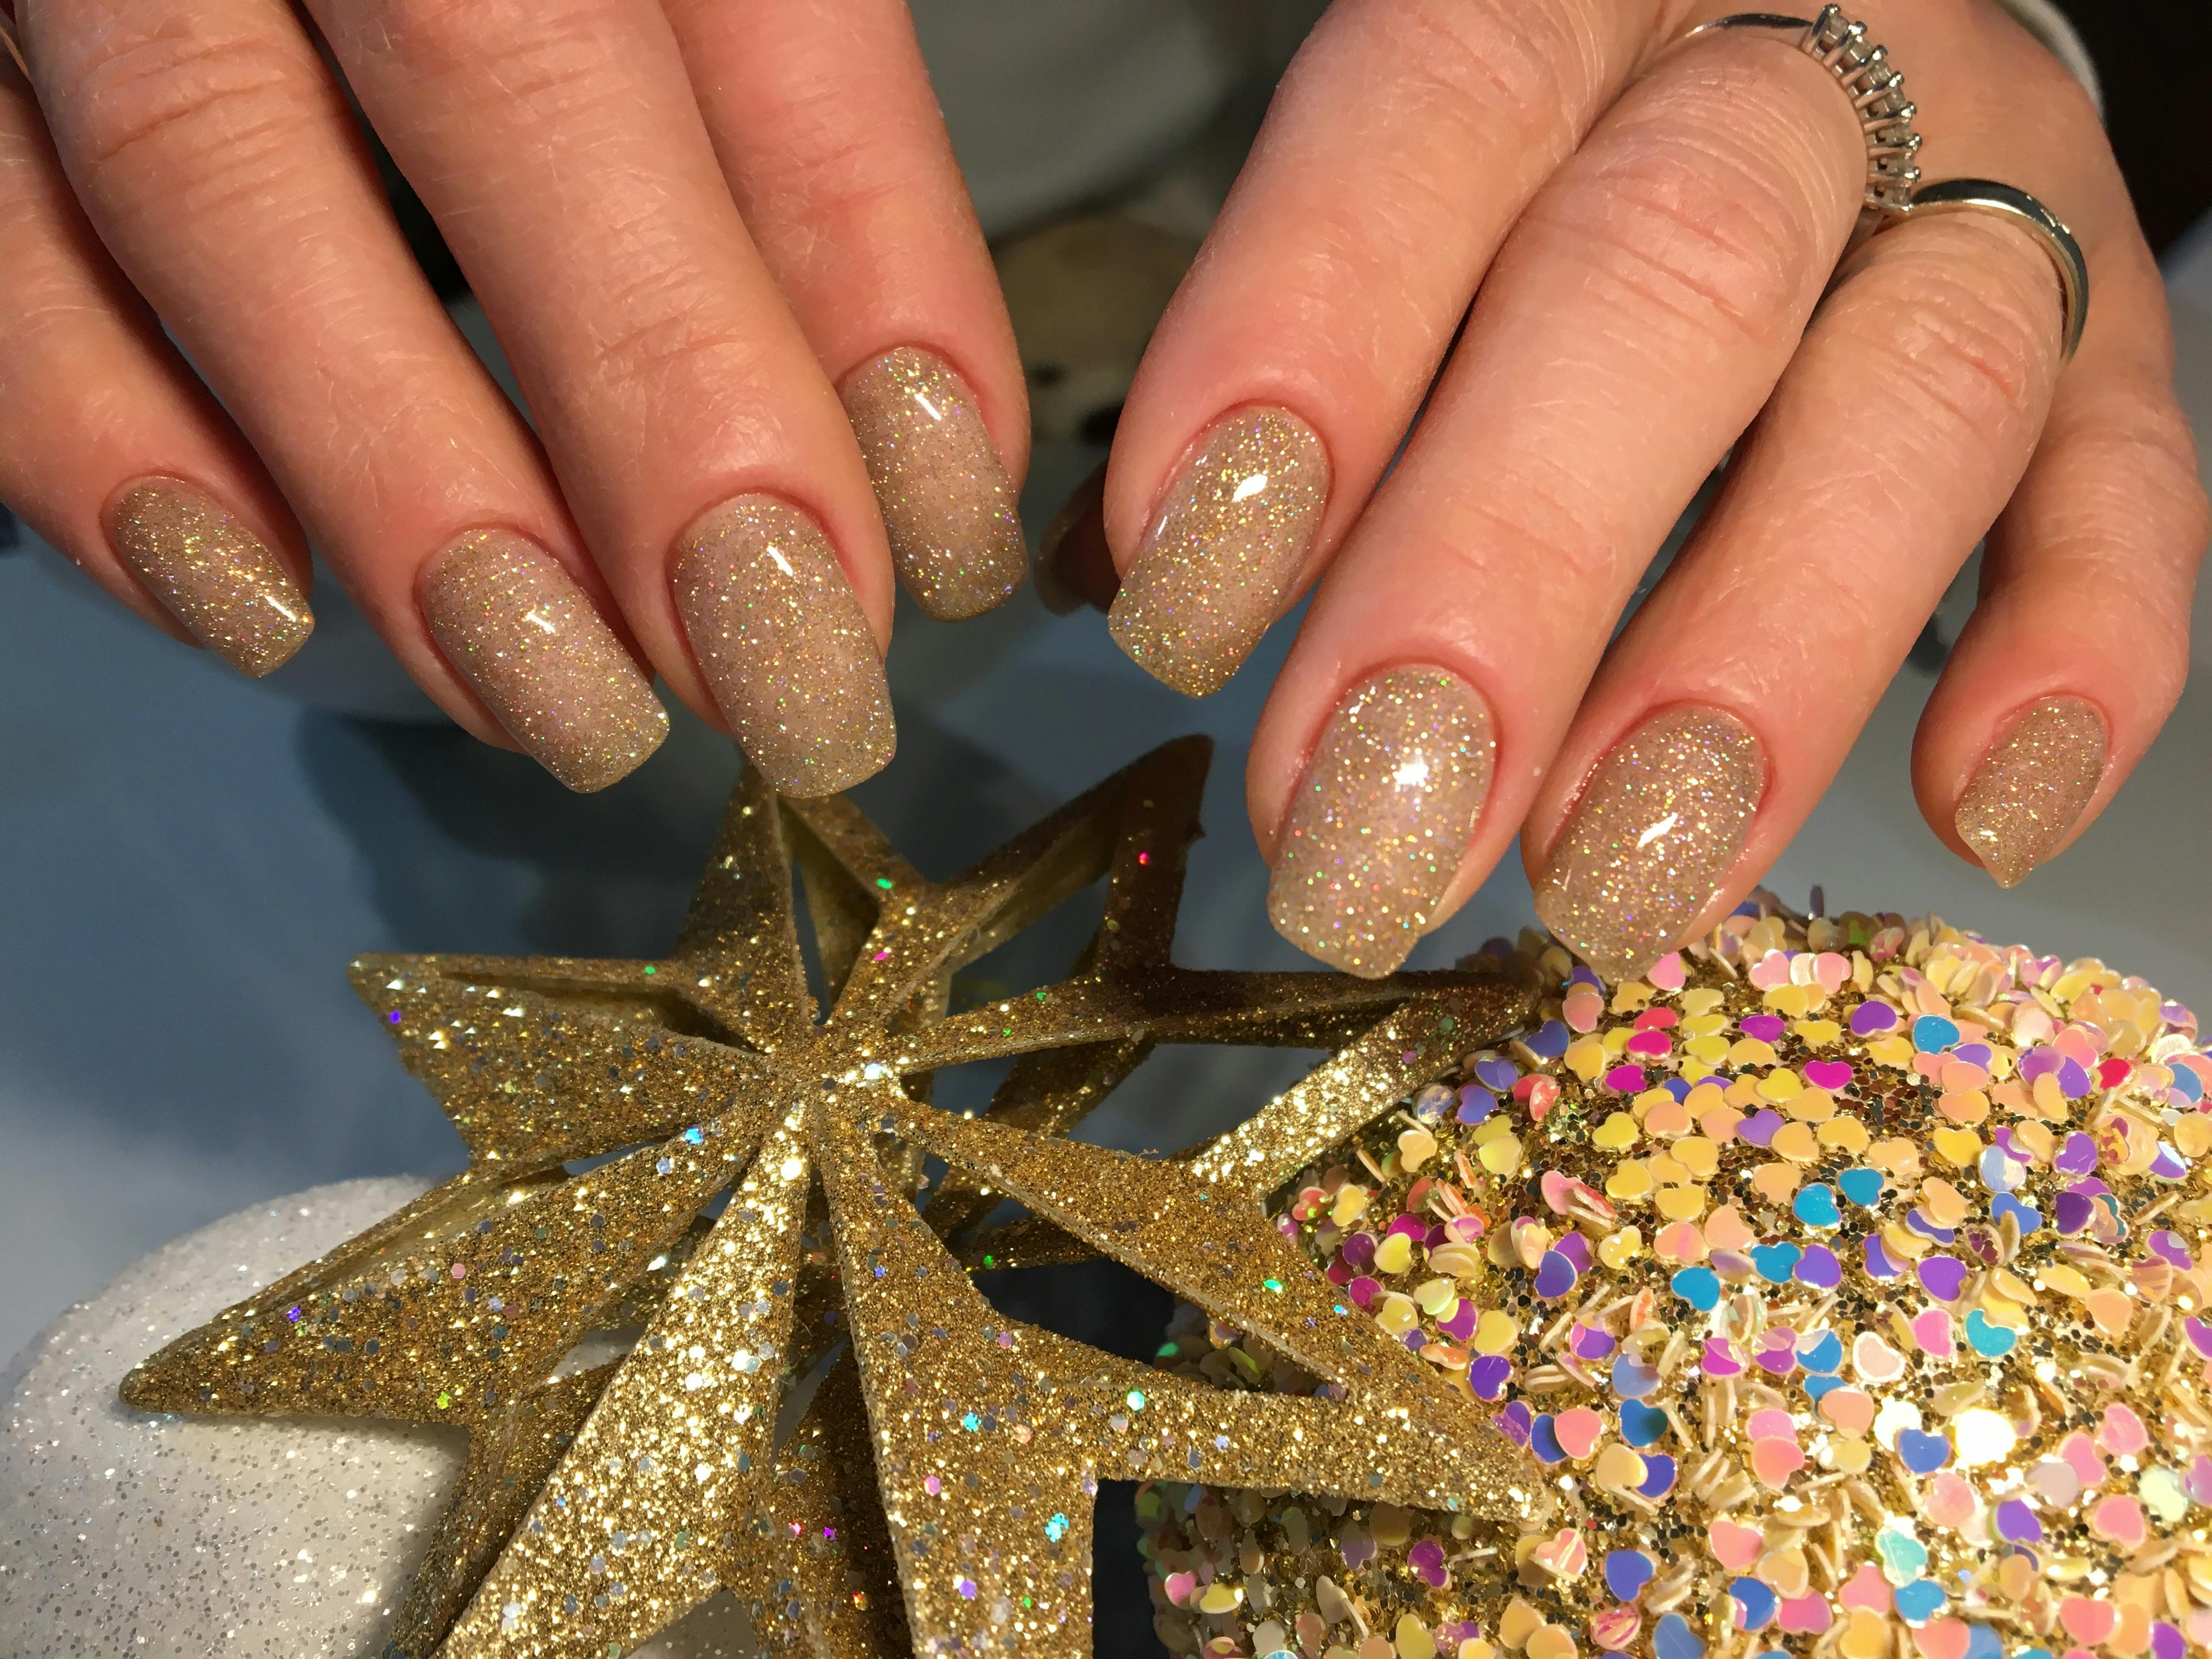 person s hands with gold glitter nails